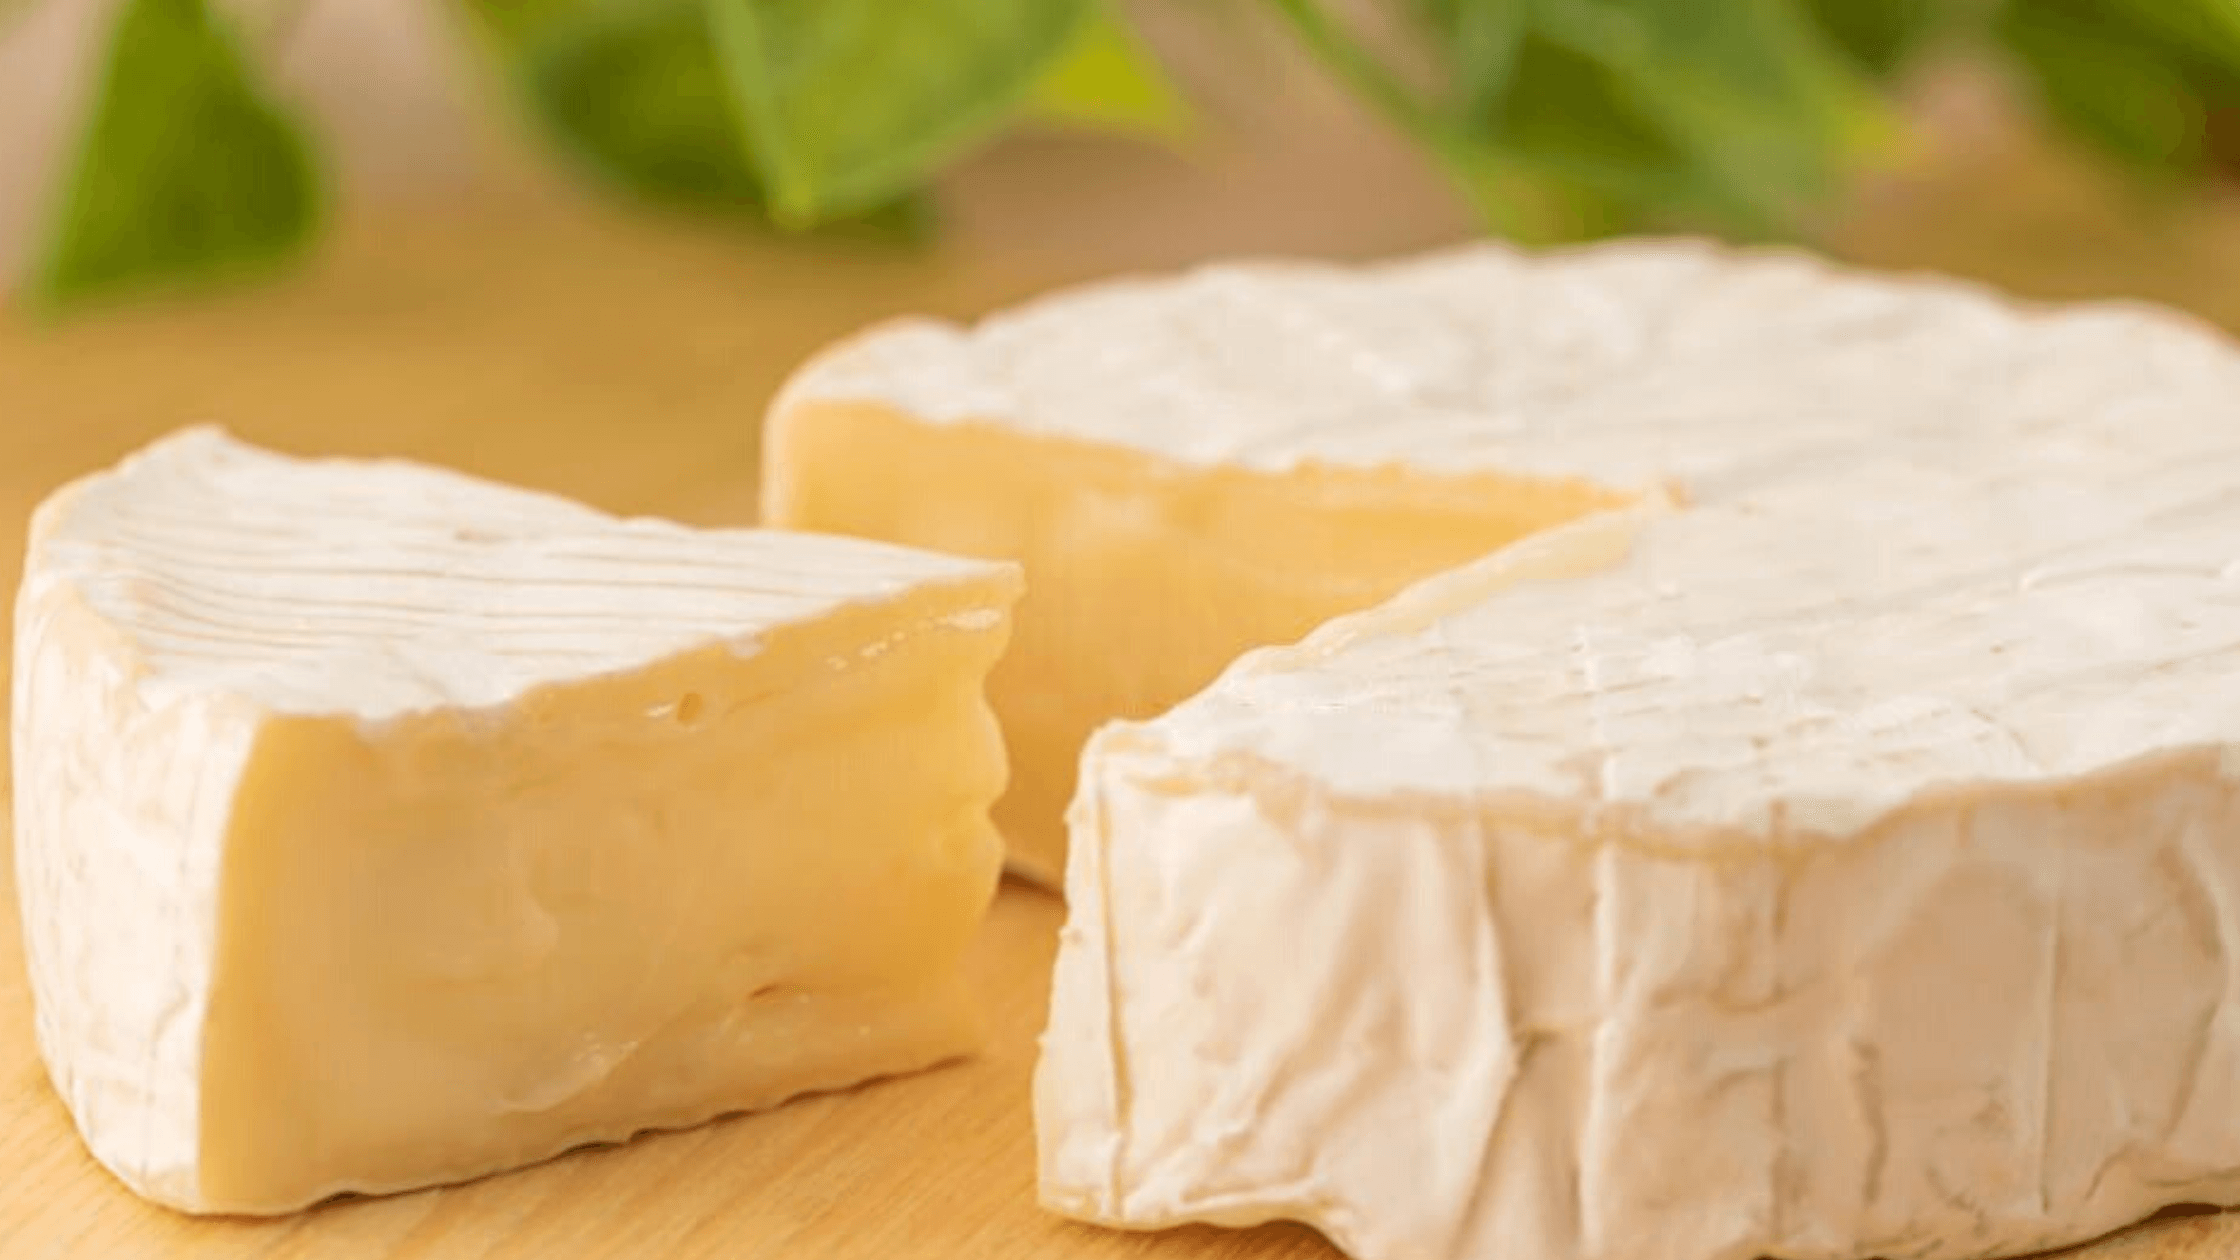 About Brie Cheese And Features Of Brie Cheese